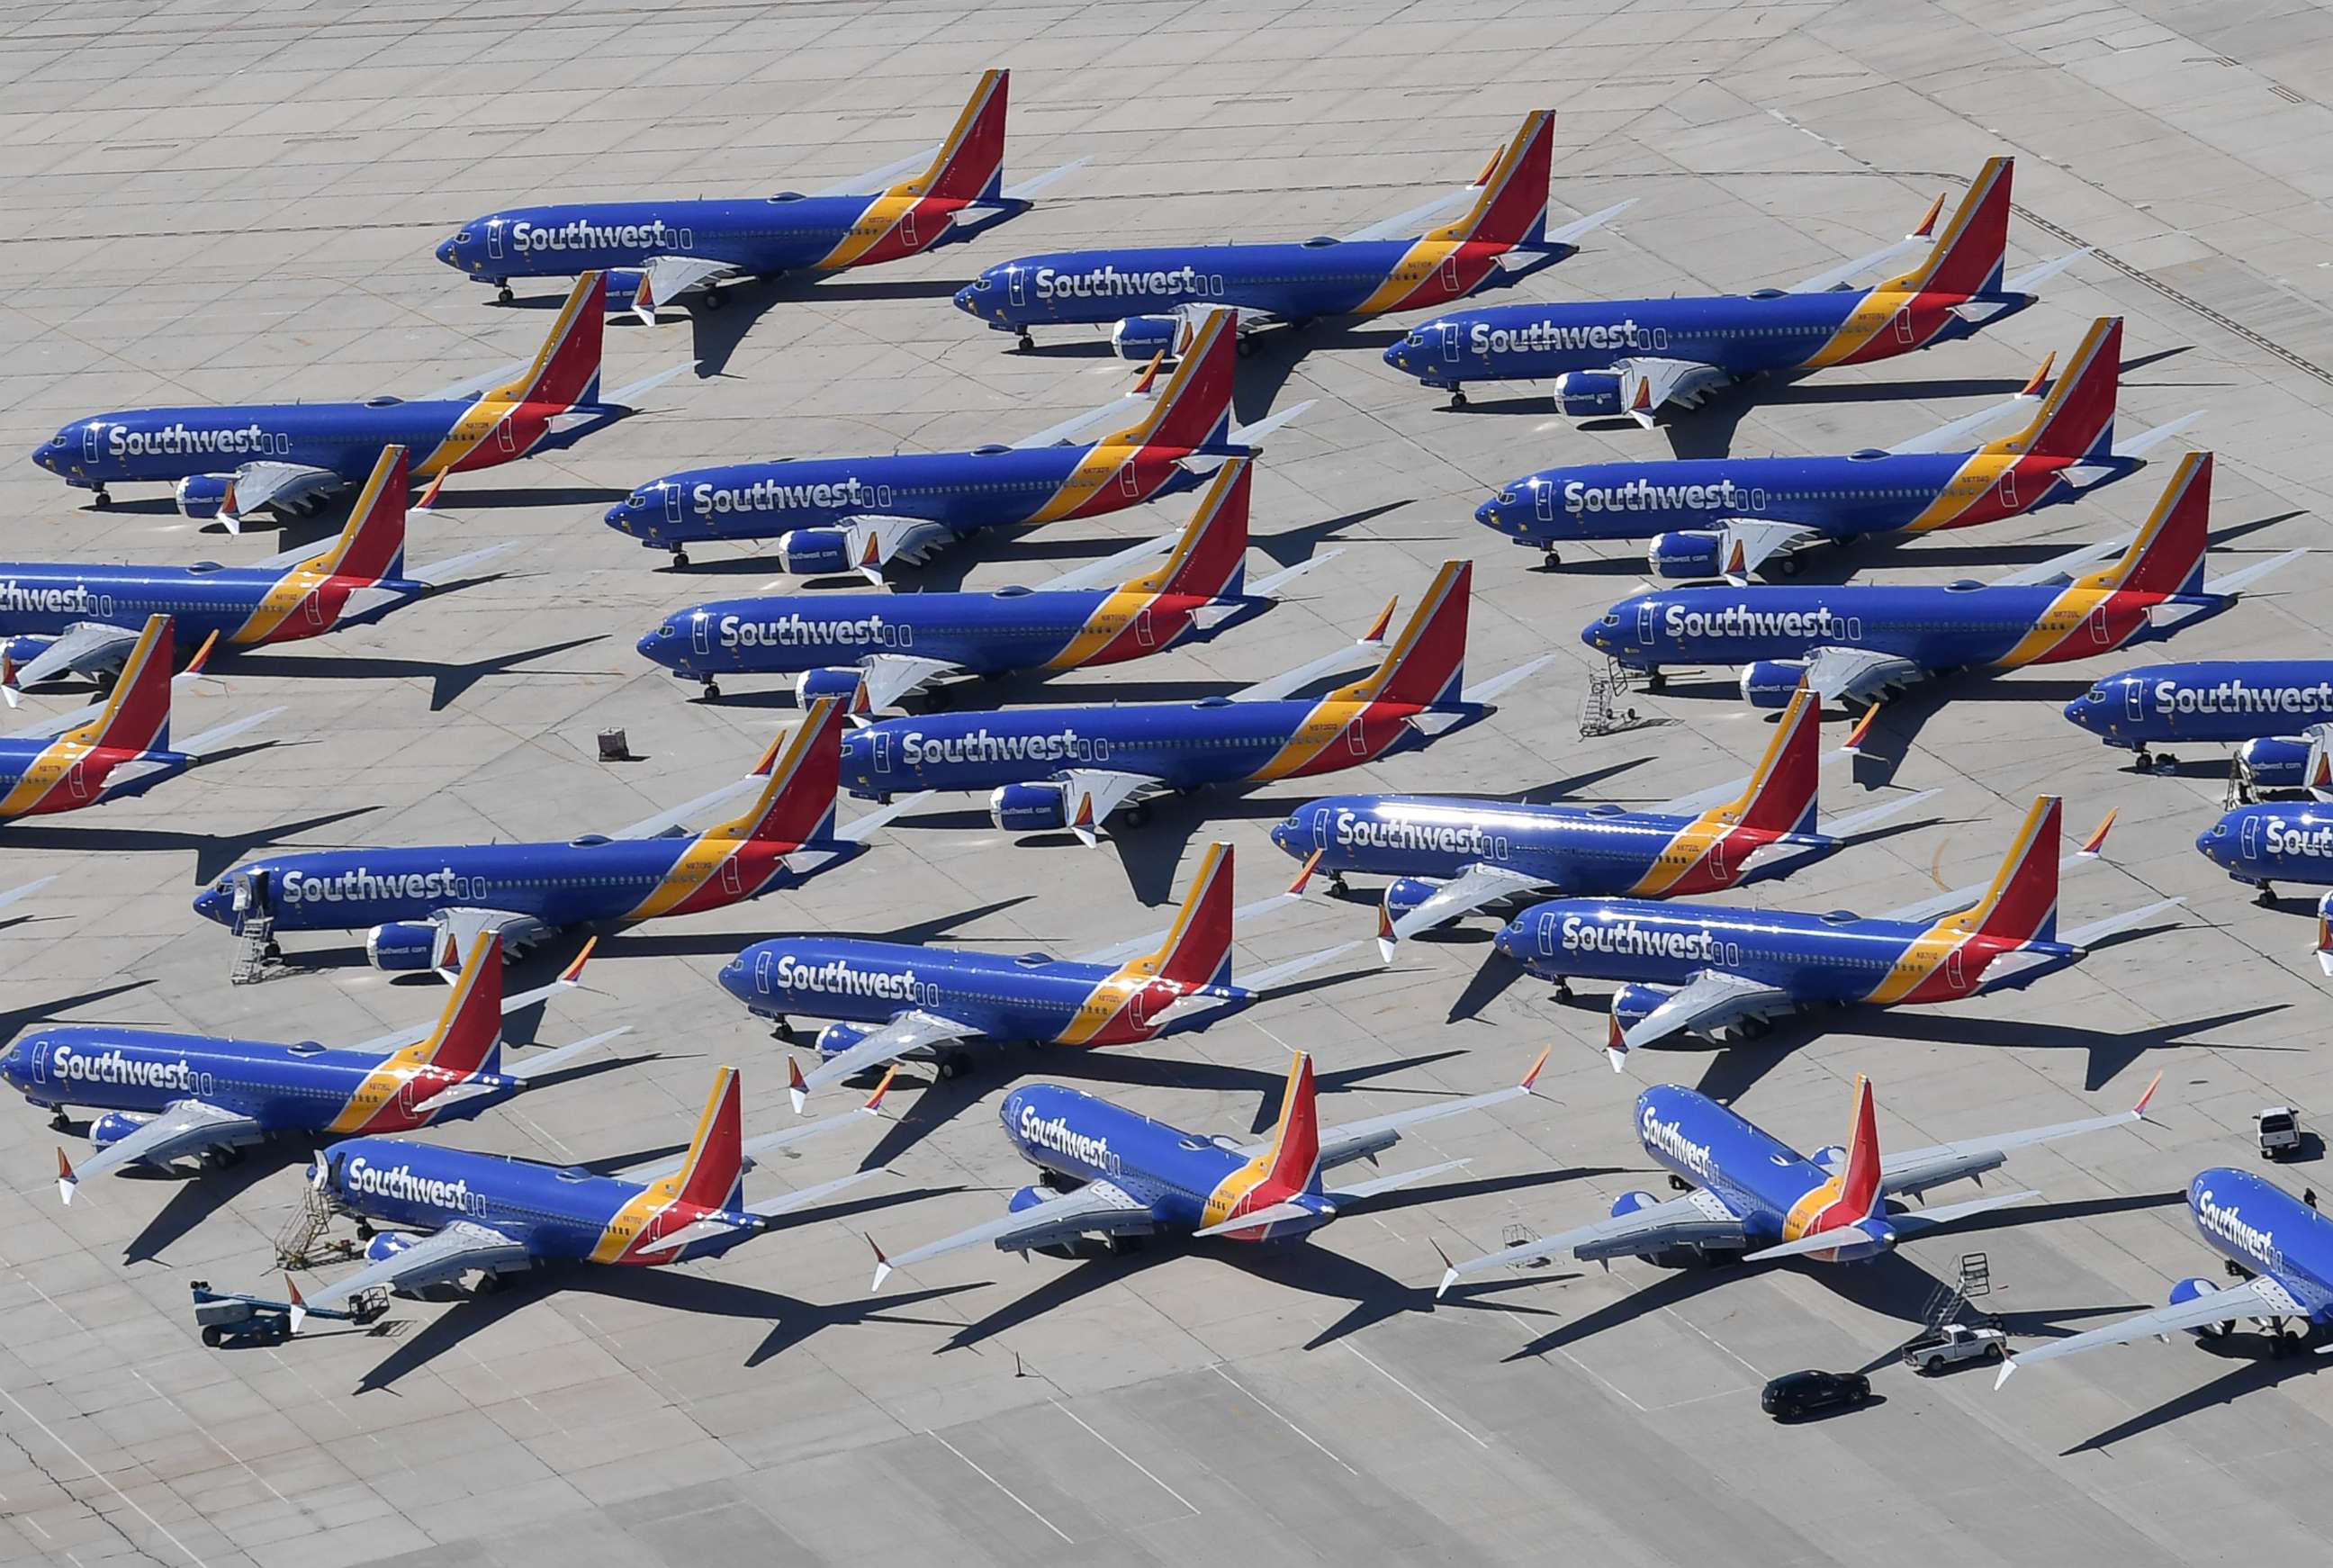 PHOTO: In this file photo taken on March 28, 2019, Southwest Airlines Boeing 737 MAX aircraft are parked on the tarmac after being grounded, at the Southern California Logistics Airport in Victorville, Calif.